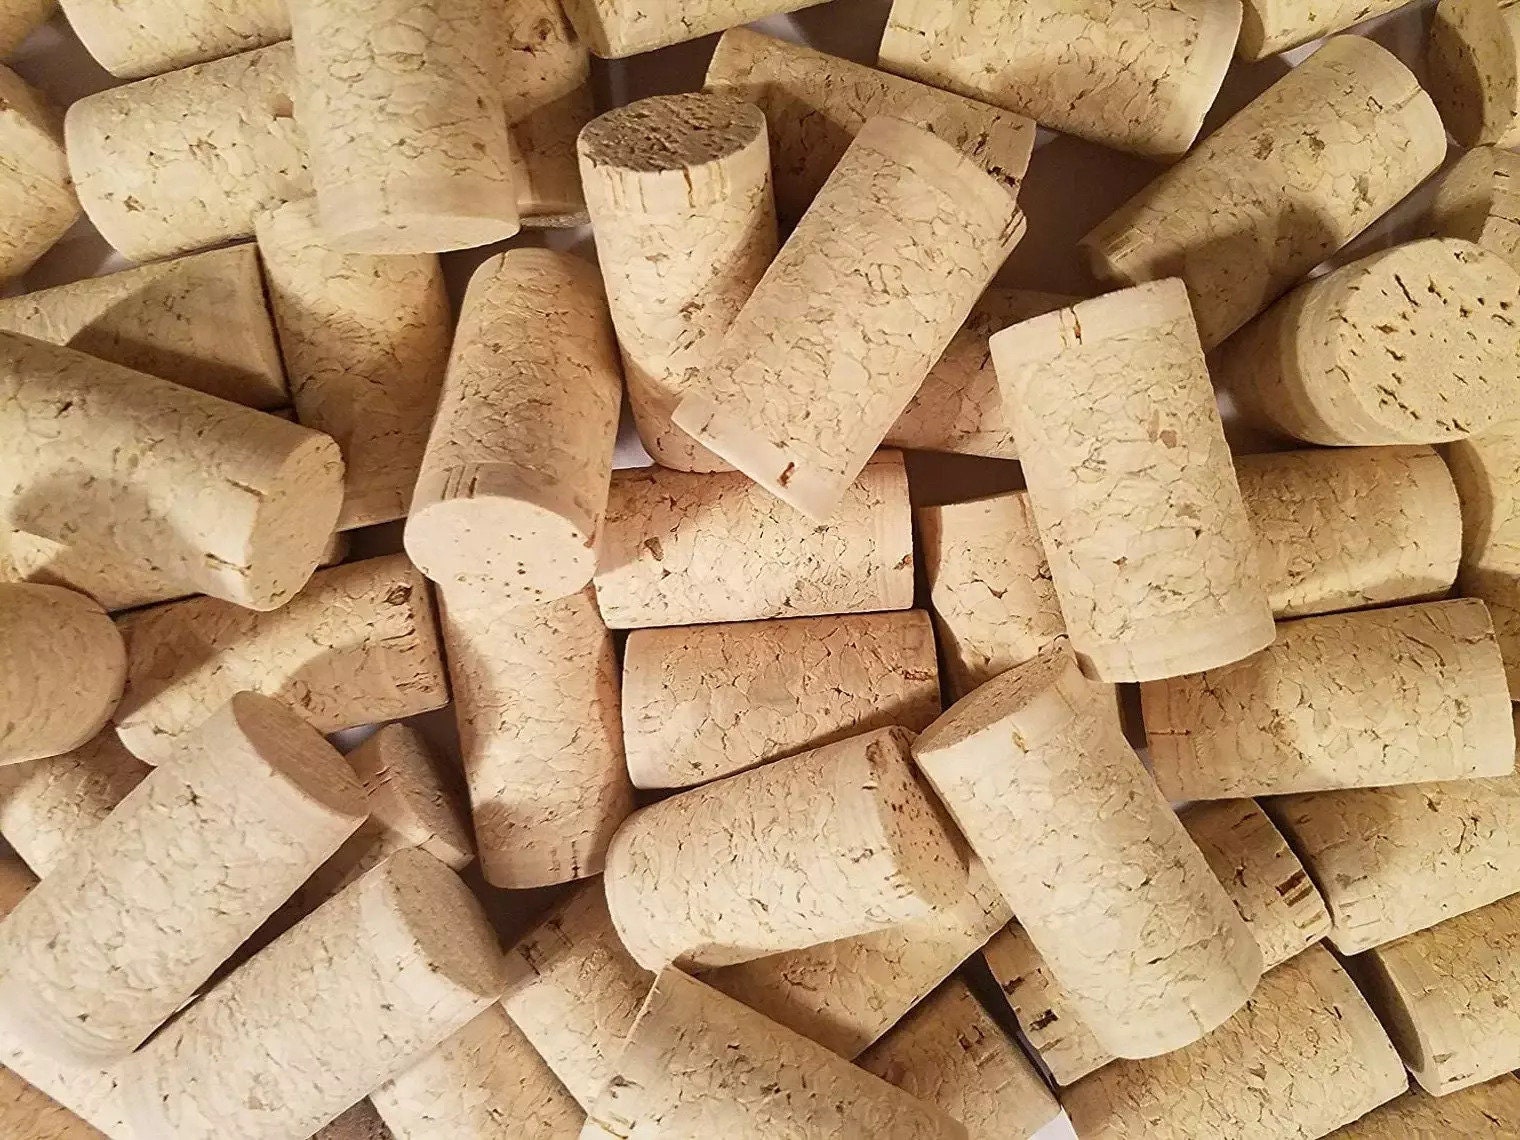 300+ Used Wine Corks for Crafts